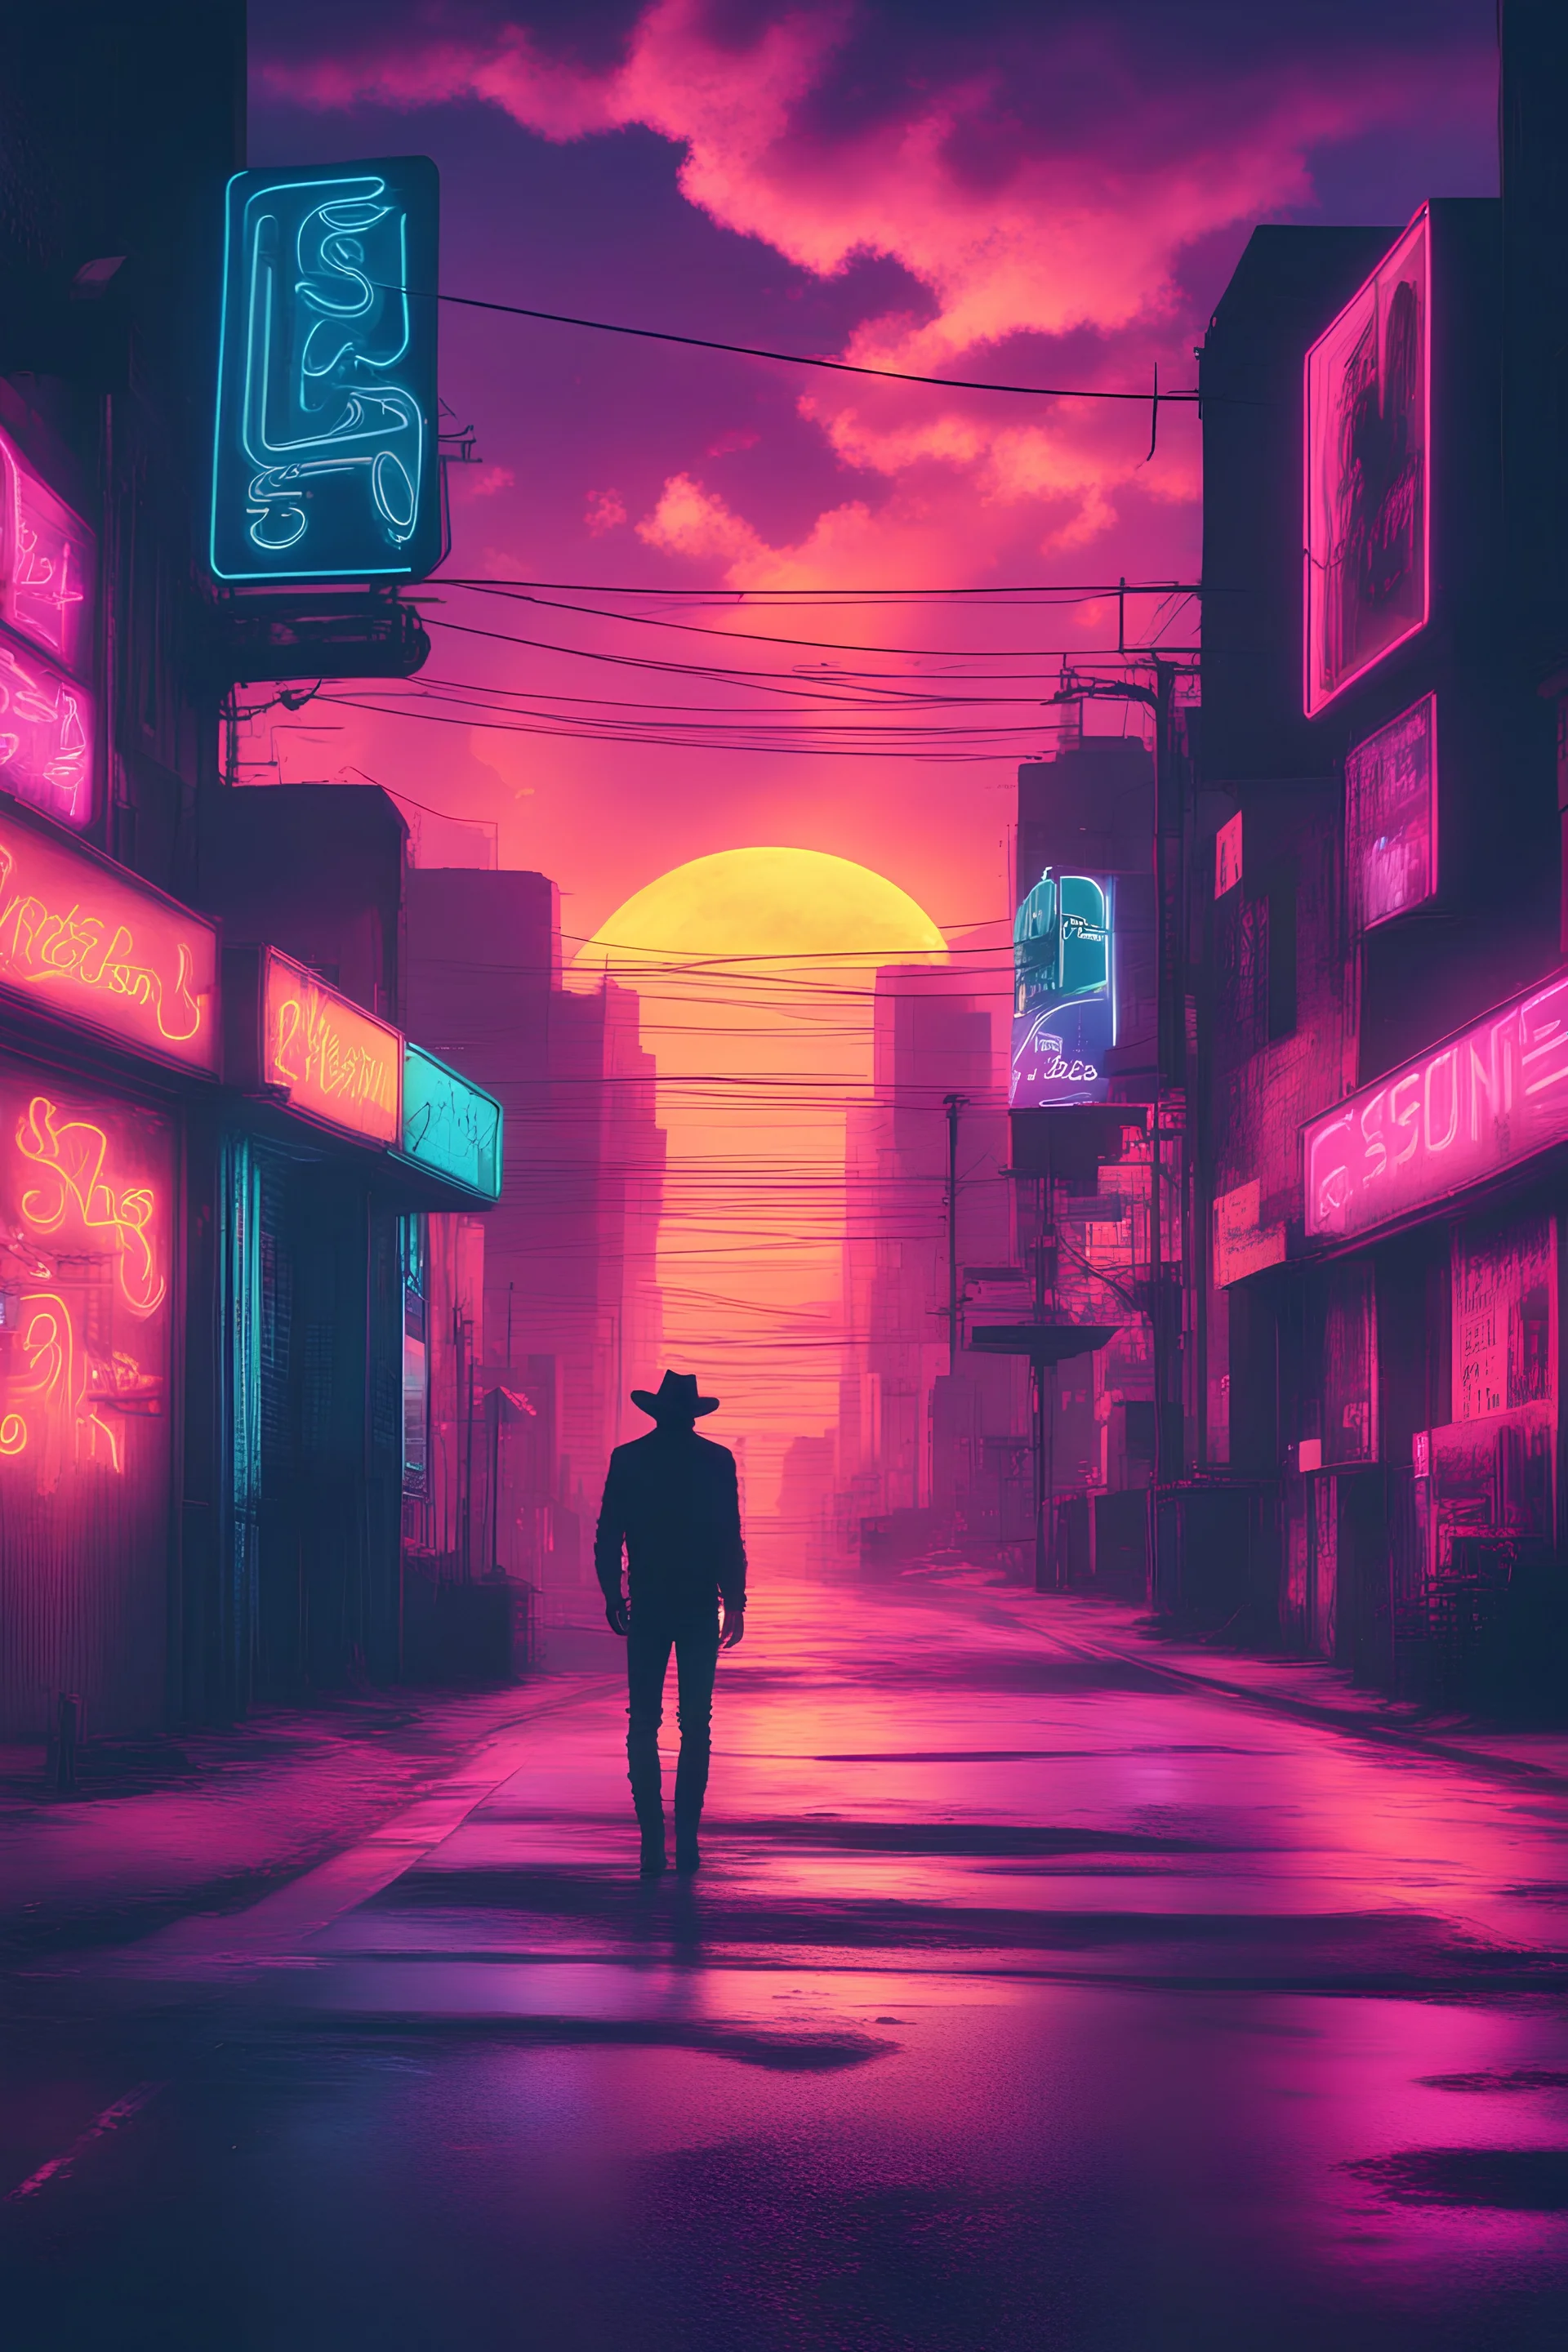 Retro wave, synth wave, with neon light, sunset, clouds, deserted street, neon signs, cowboy